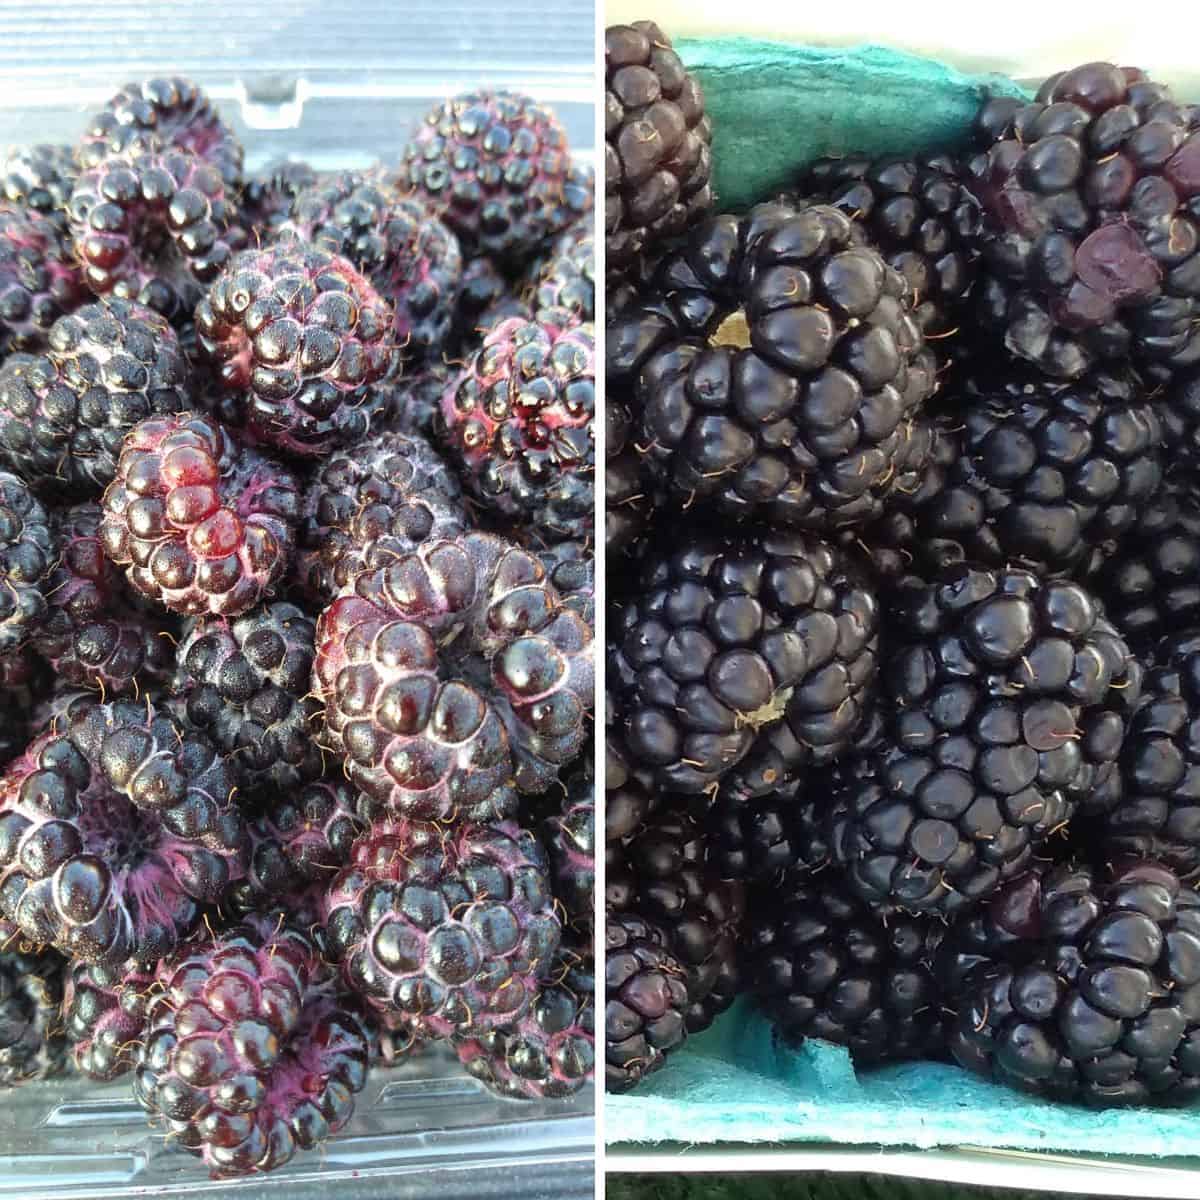 On the left is a close up of black raspberries and on the right is a close up of blackberries.